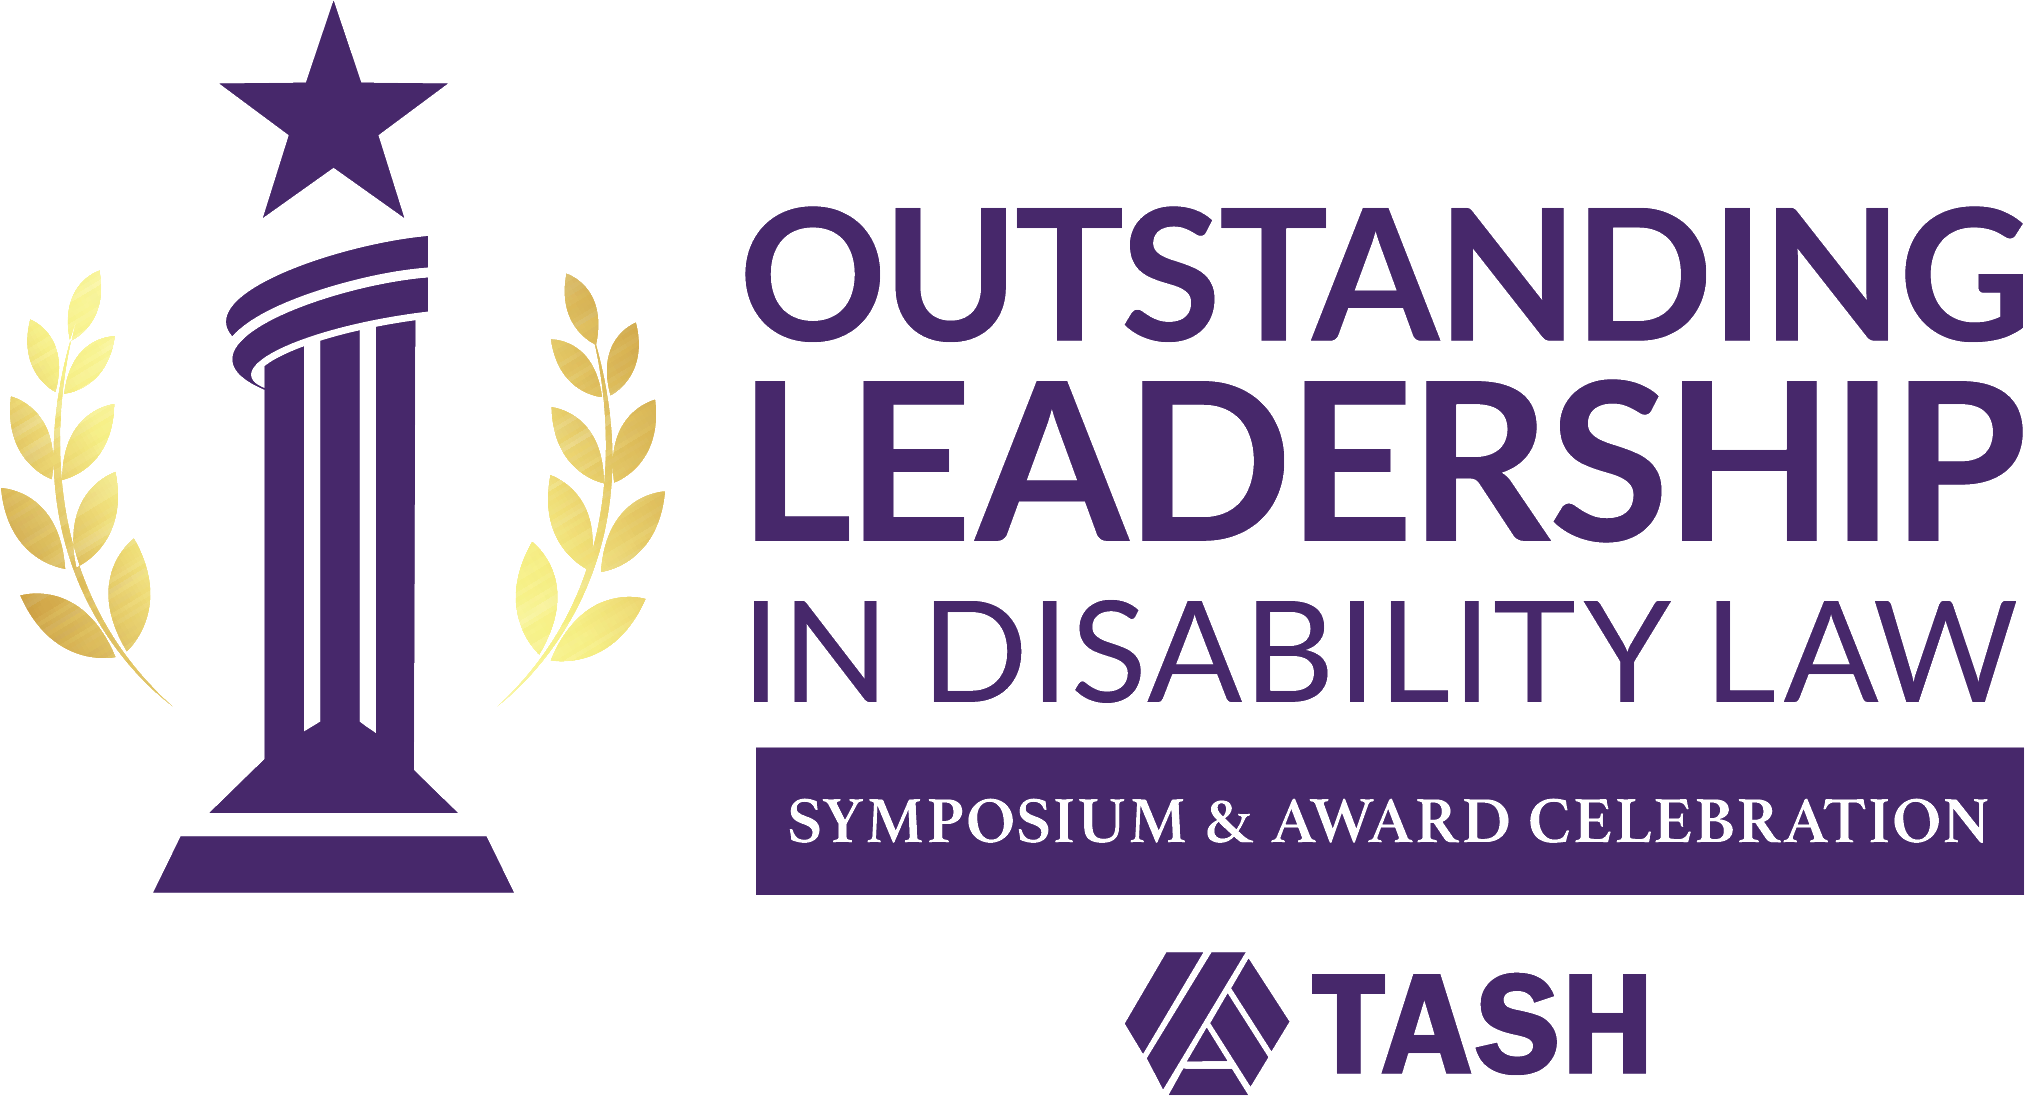 2023 Outstanding Leadership in Disability Law Symposium and Awards Celebration